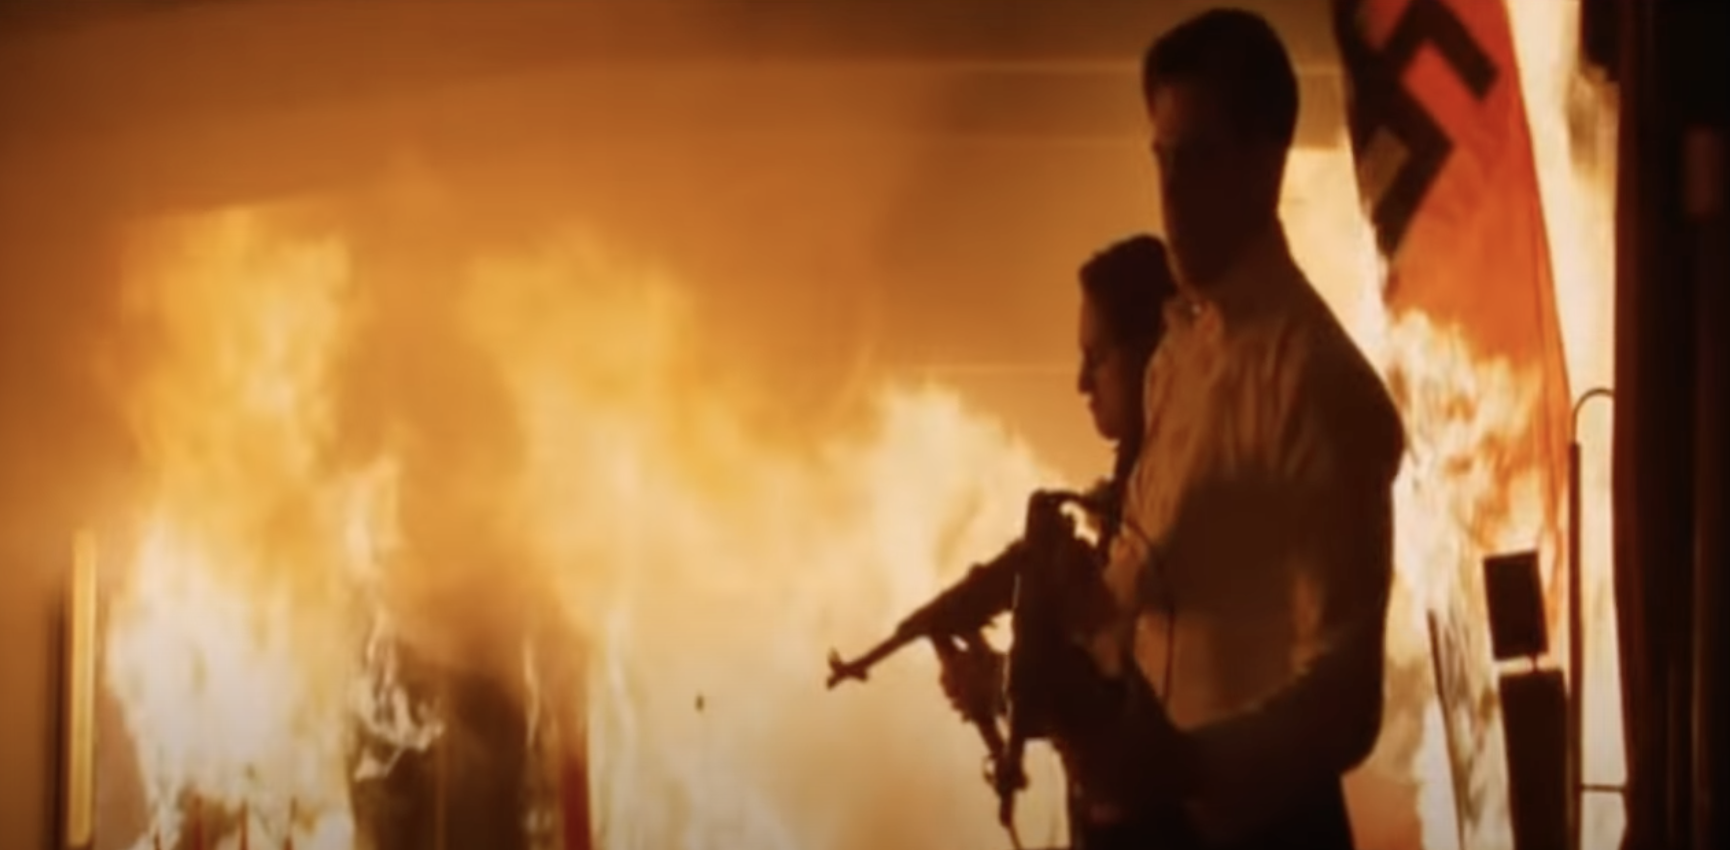 Two men prepare guns as a theater goes up in flames around them